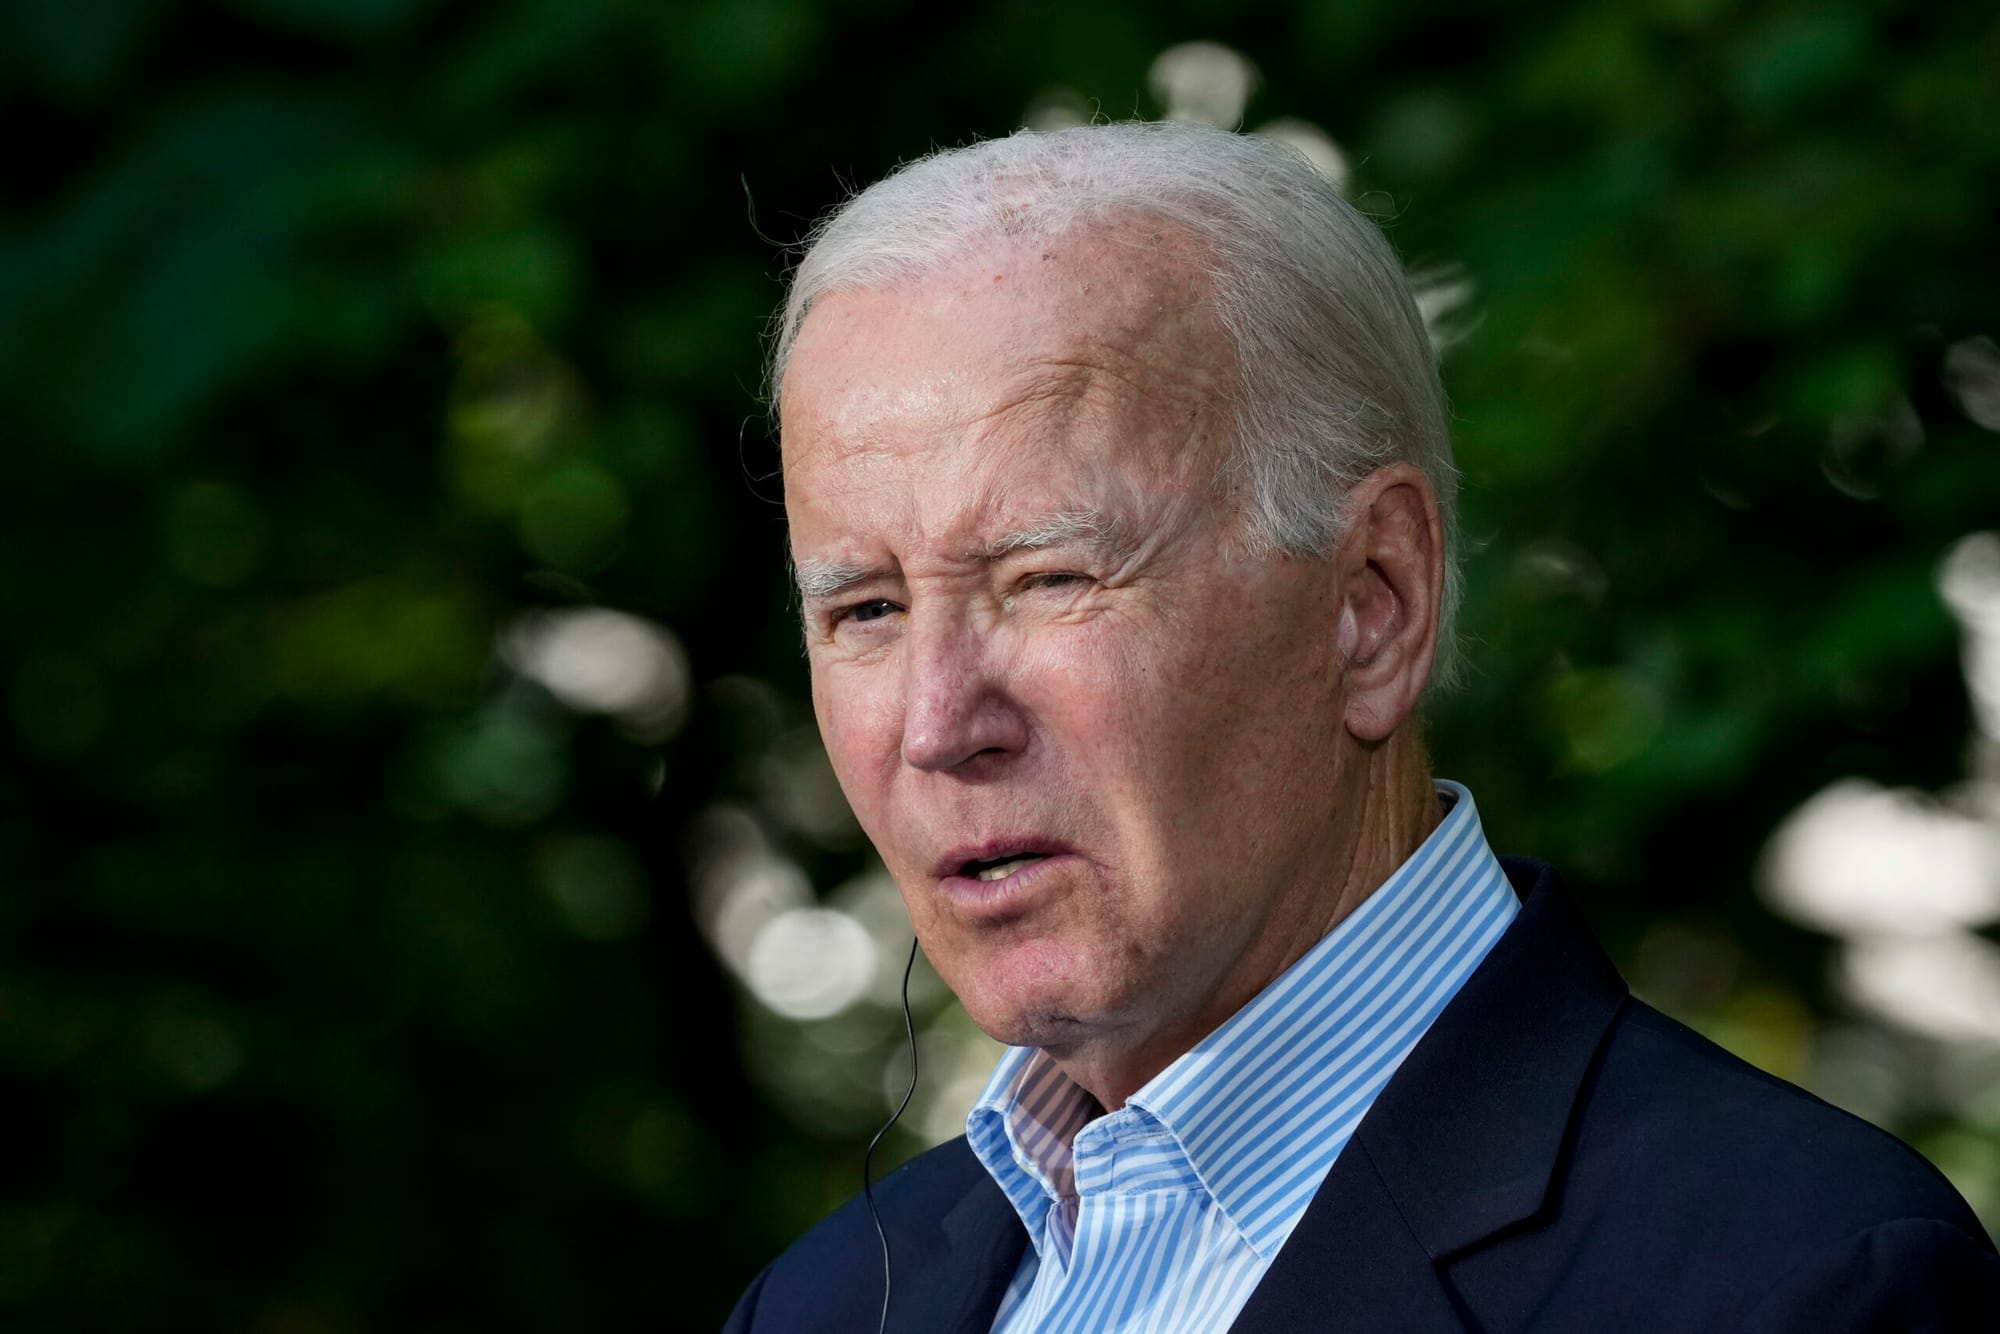 Poll Reveals 72% of Voters Doubt Biden's Mental and Physical Fitness for Presidency